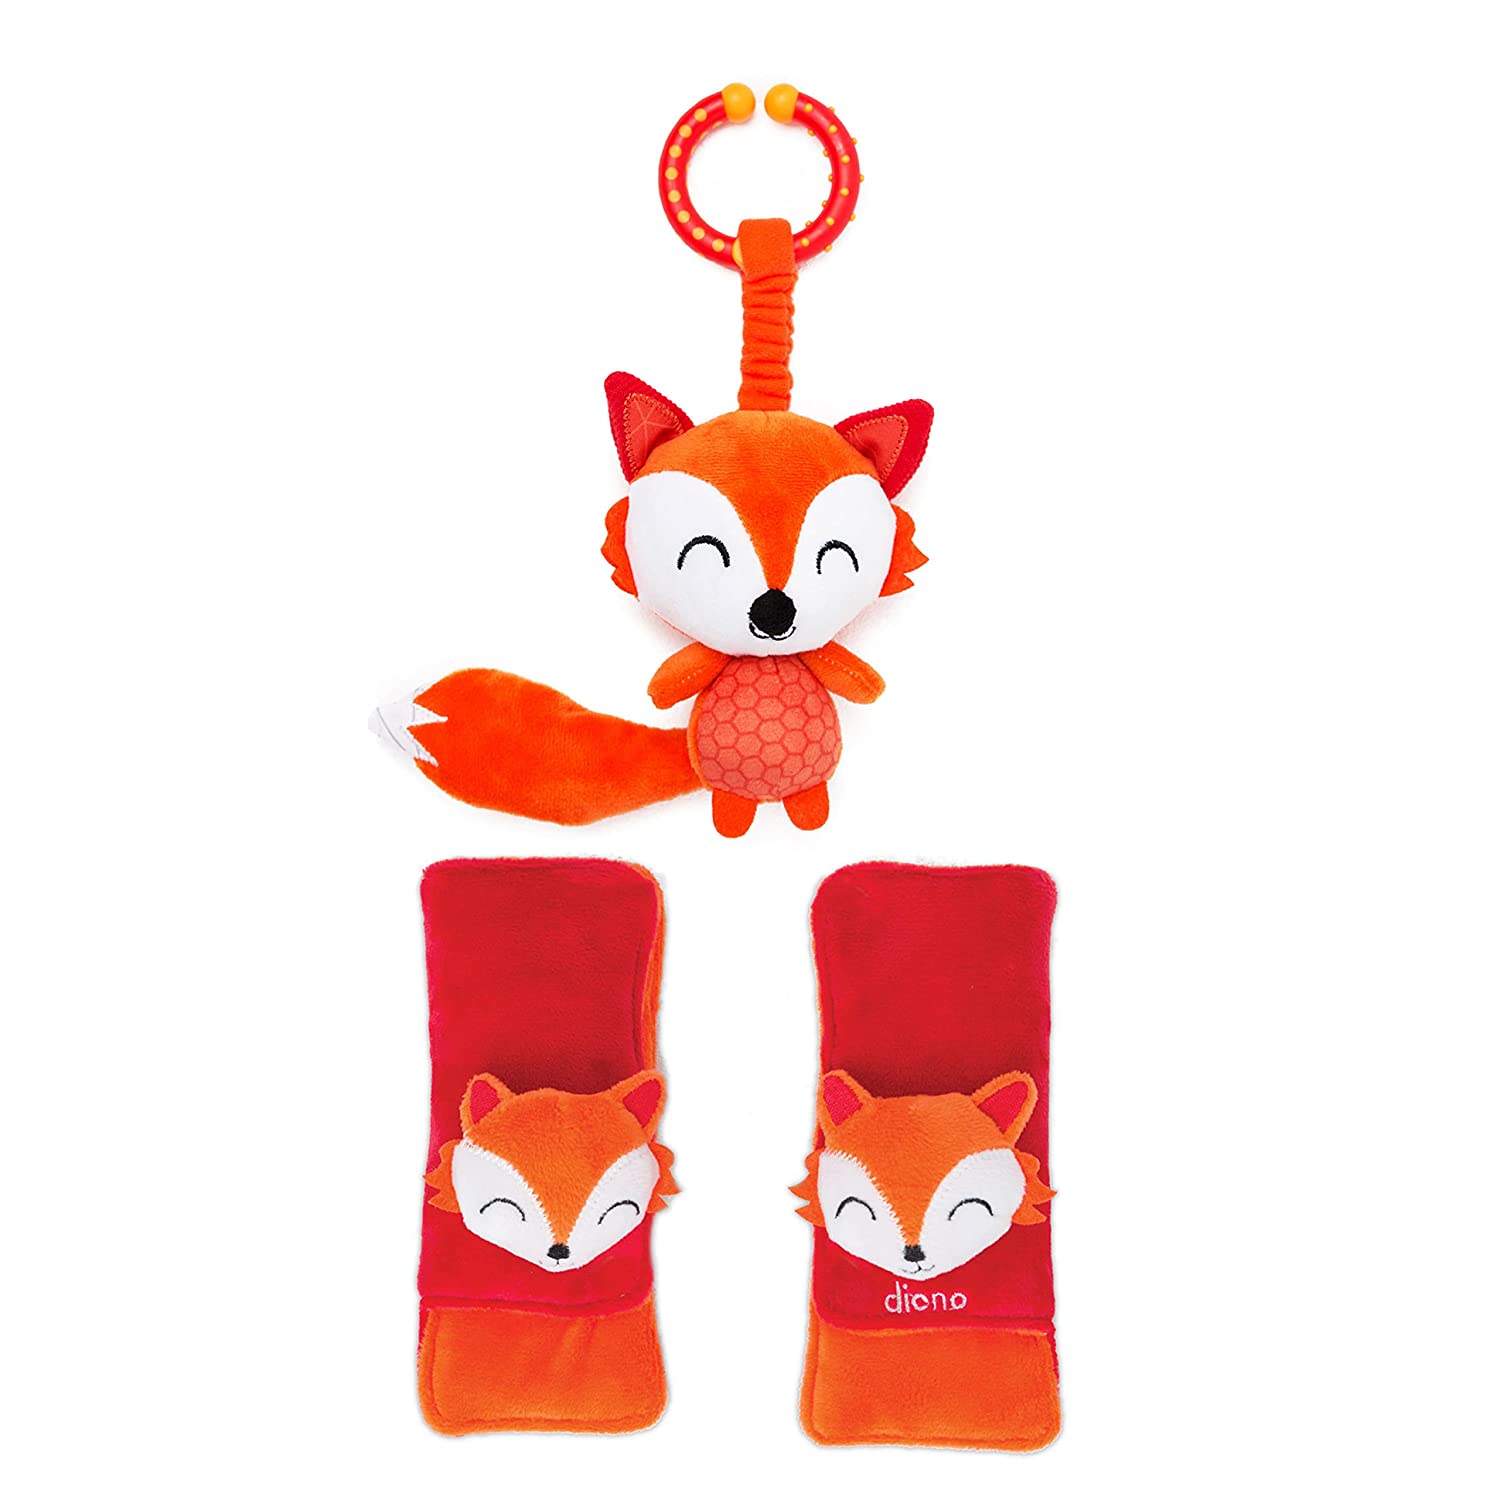 Diono Baby Fox Character Car Seat Straps & Toy, Shoulder Pads for Baby, Infant, Toddler, 2 Pack